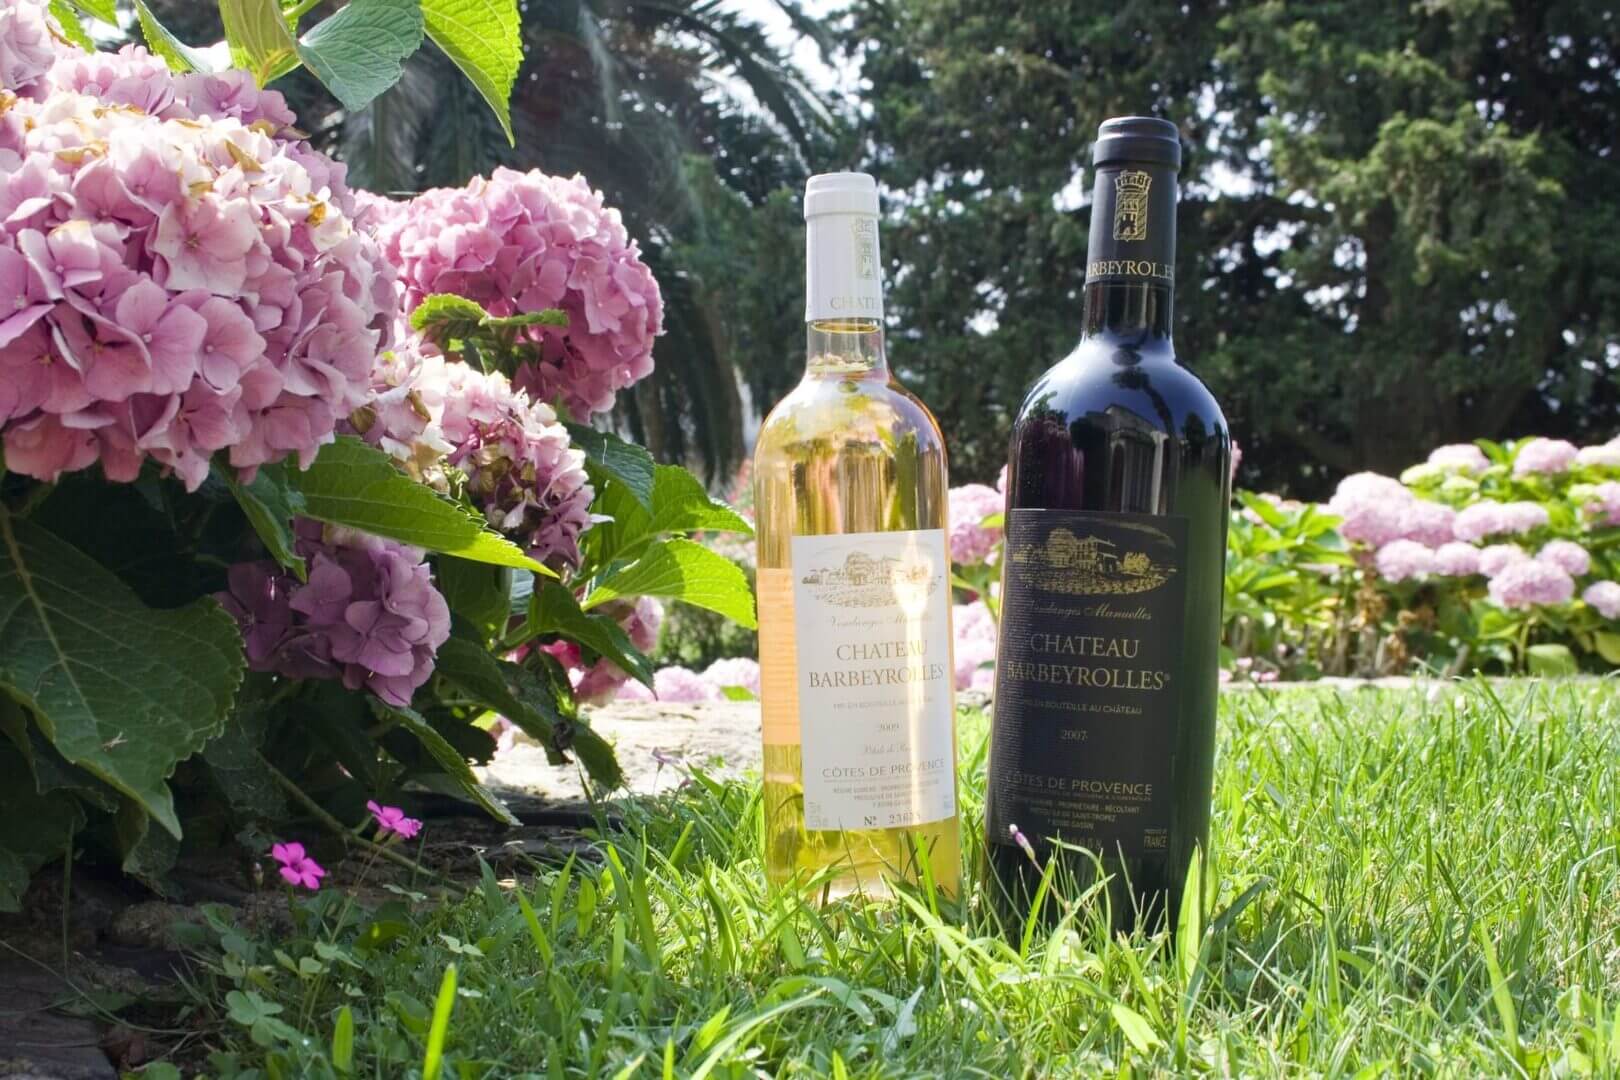 Bottles of wine from Chateau Barbeyrolles next to flowers